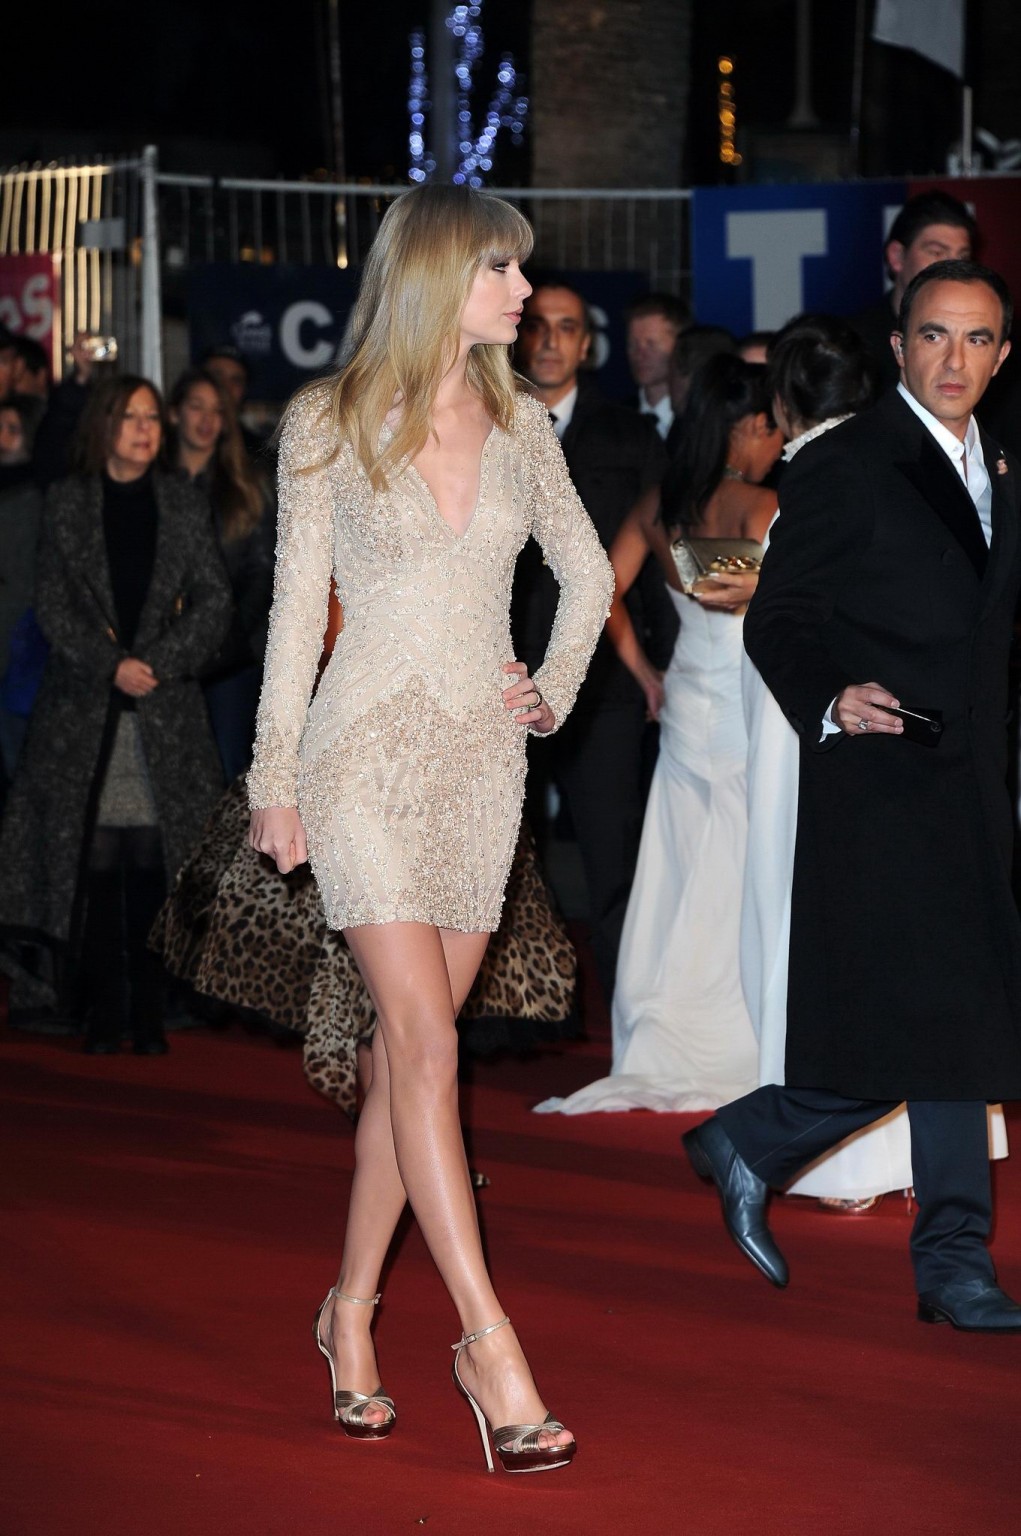 Taylor Swift leggy wearing a mini dress at 2013 NRJ Music Awards in Cannes #75242693